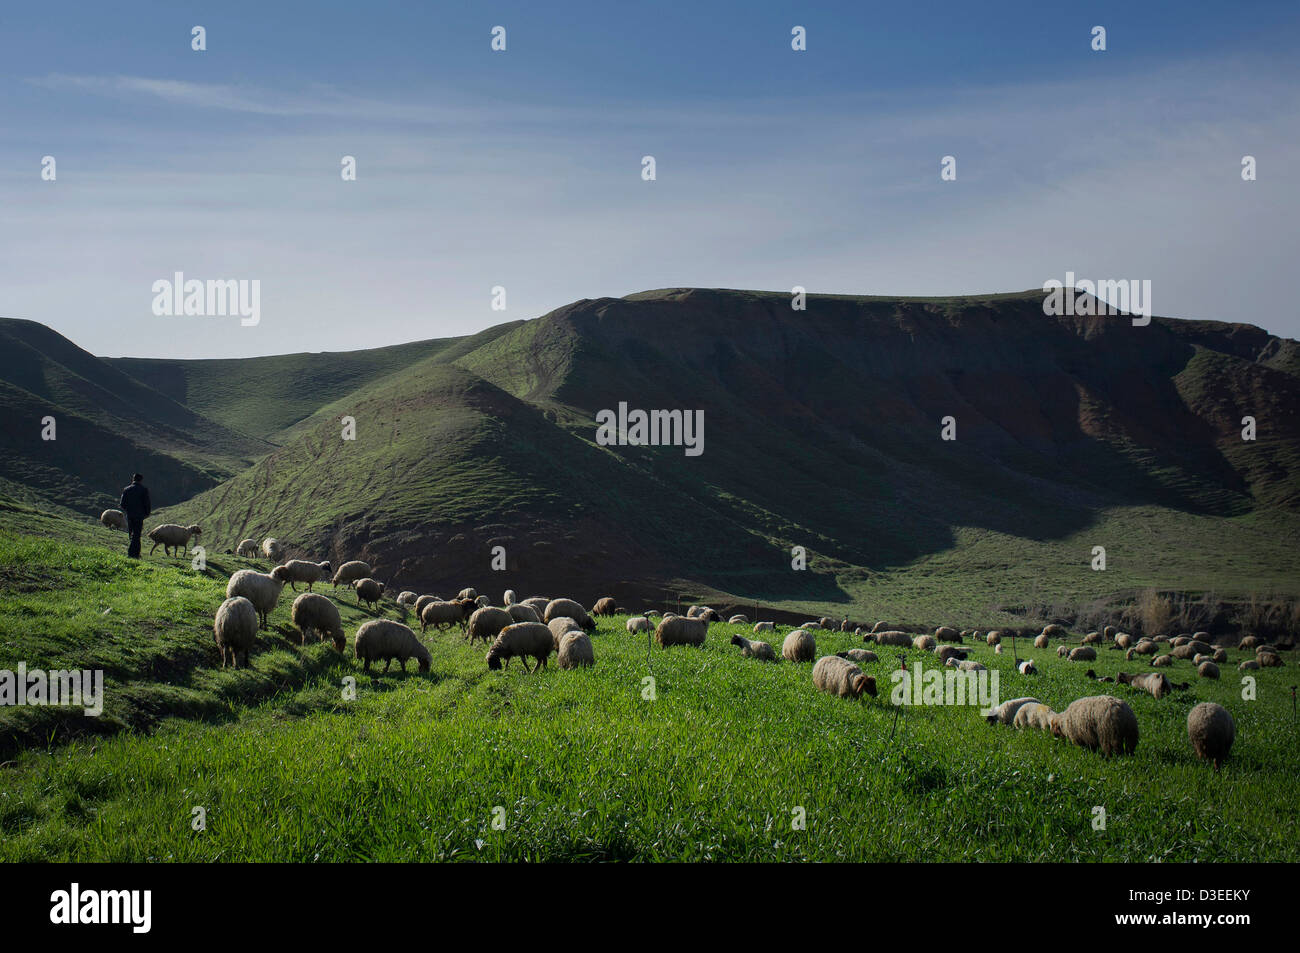 A young shepherd tends to sheep in Iraq. Stock Photo